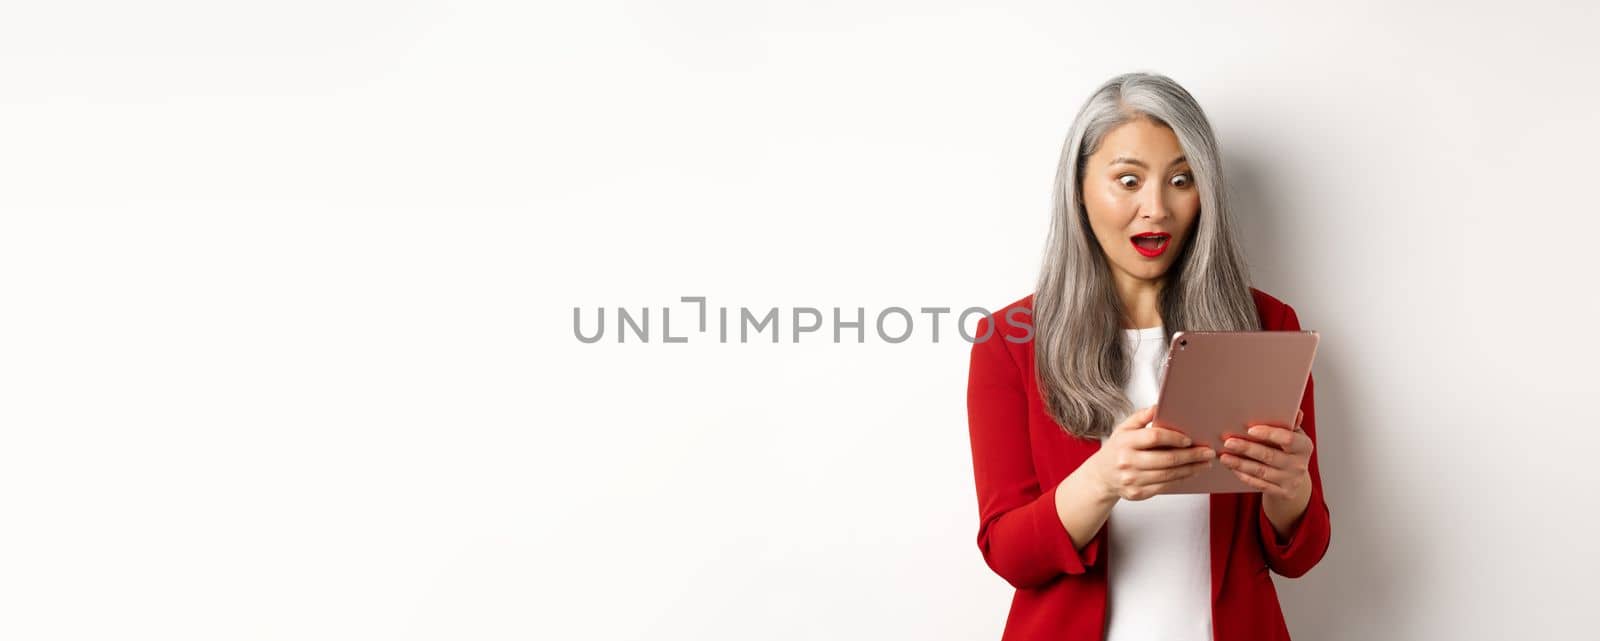 Business. Asian senior woman staring at digital tablet screen with amazed and surprised face, reading amazing news online, standing over white background.